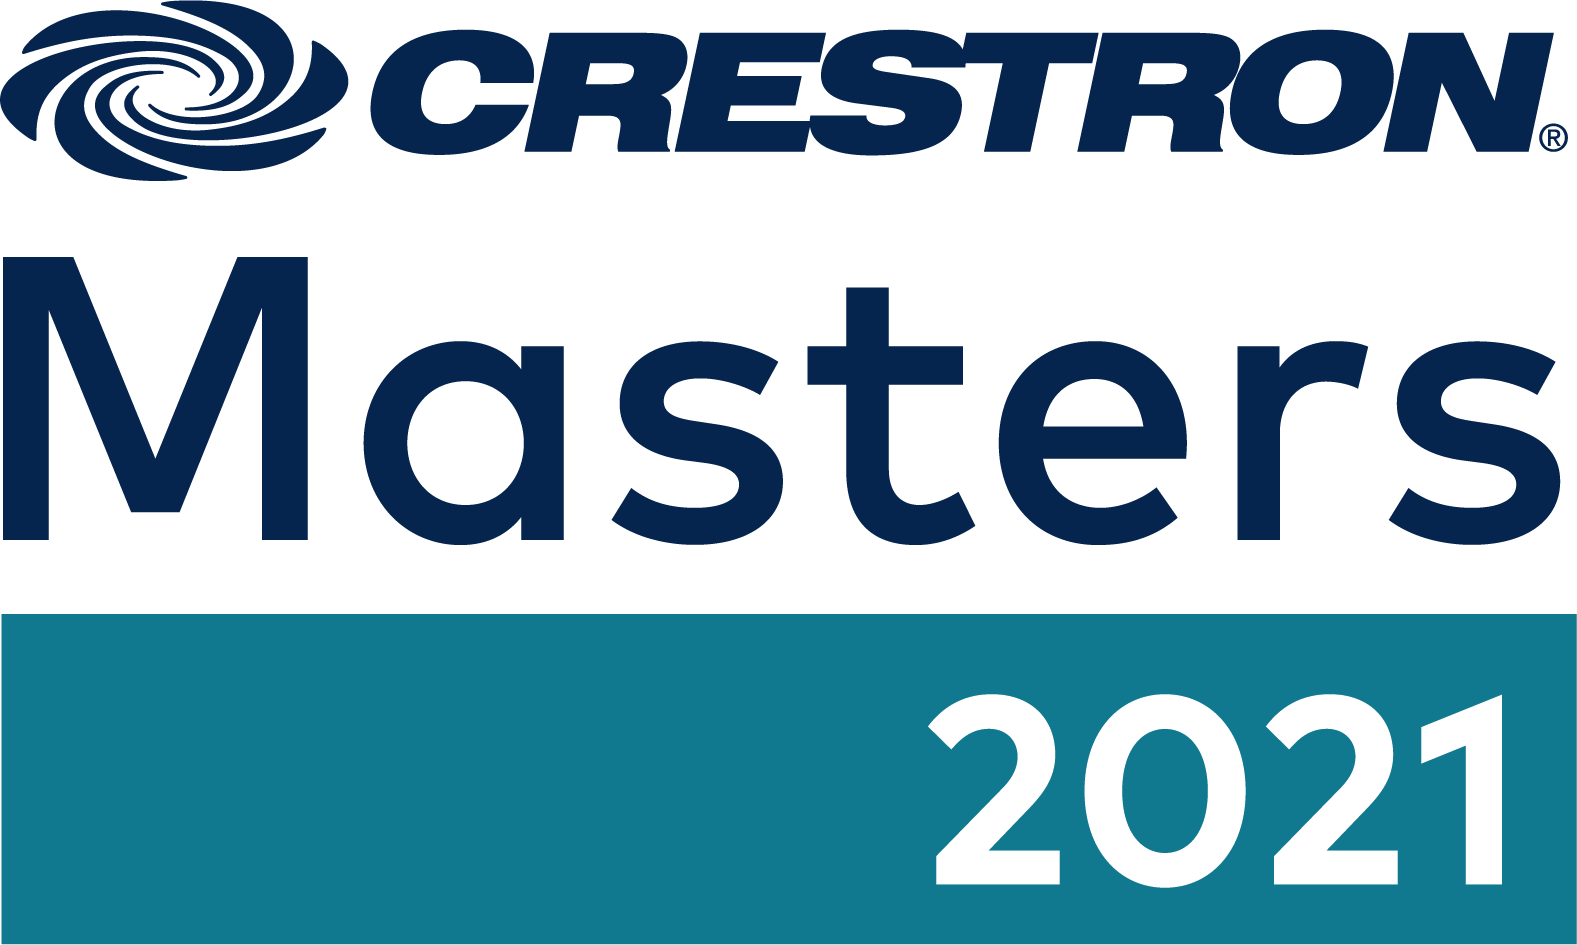 Crestron Masterfully Sets Its Masters 2021 Event, the Industry's